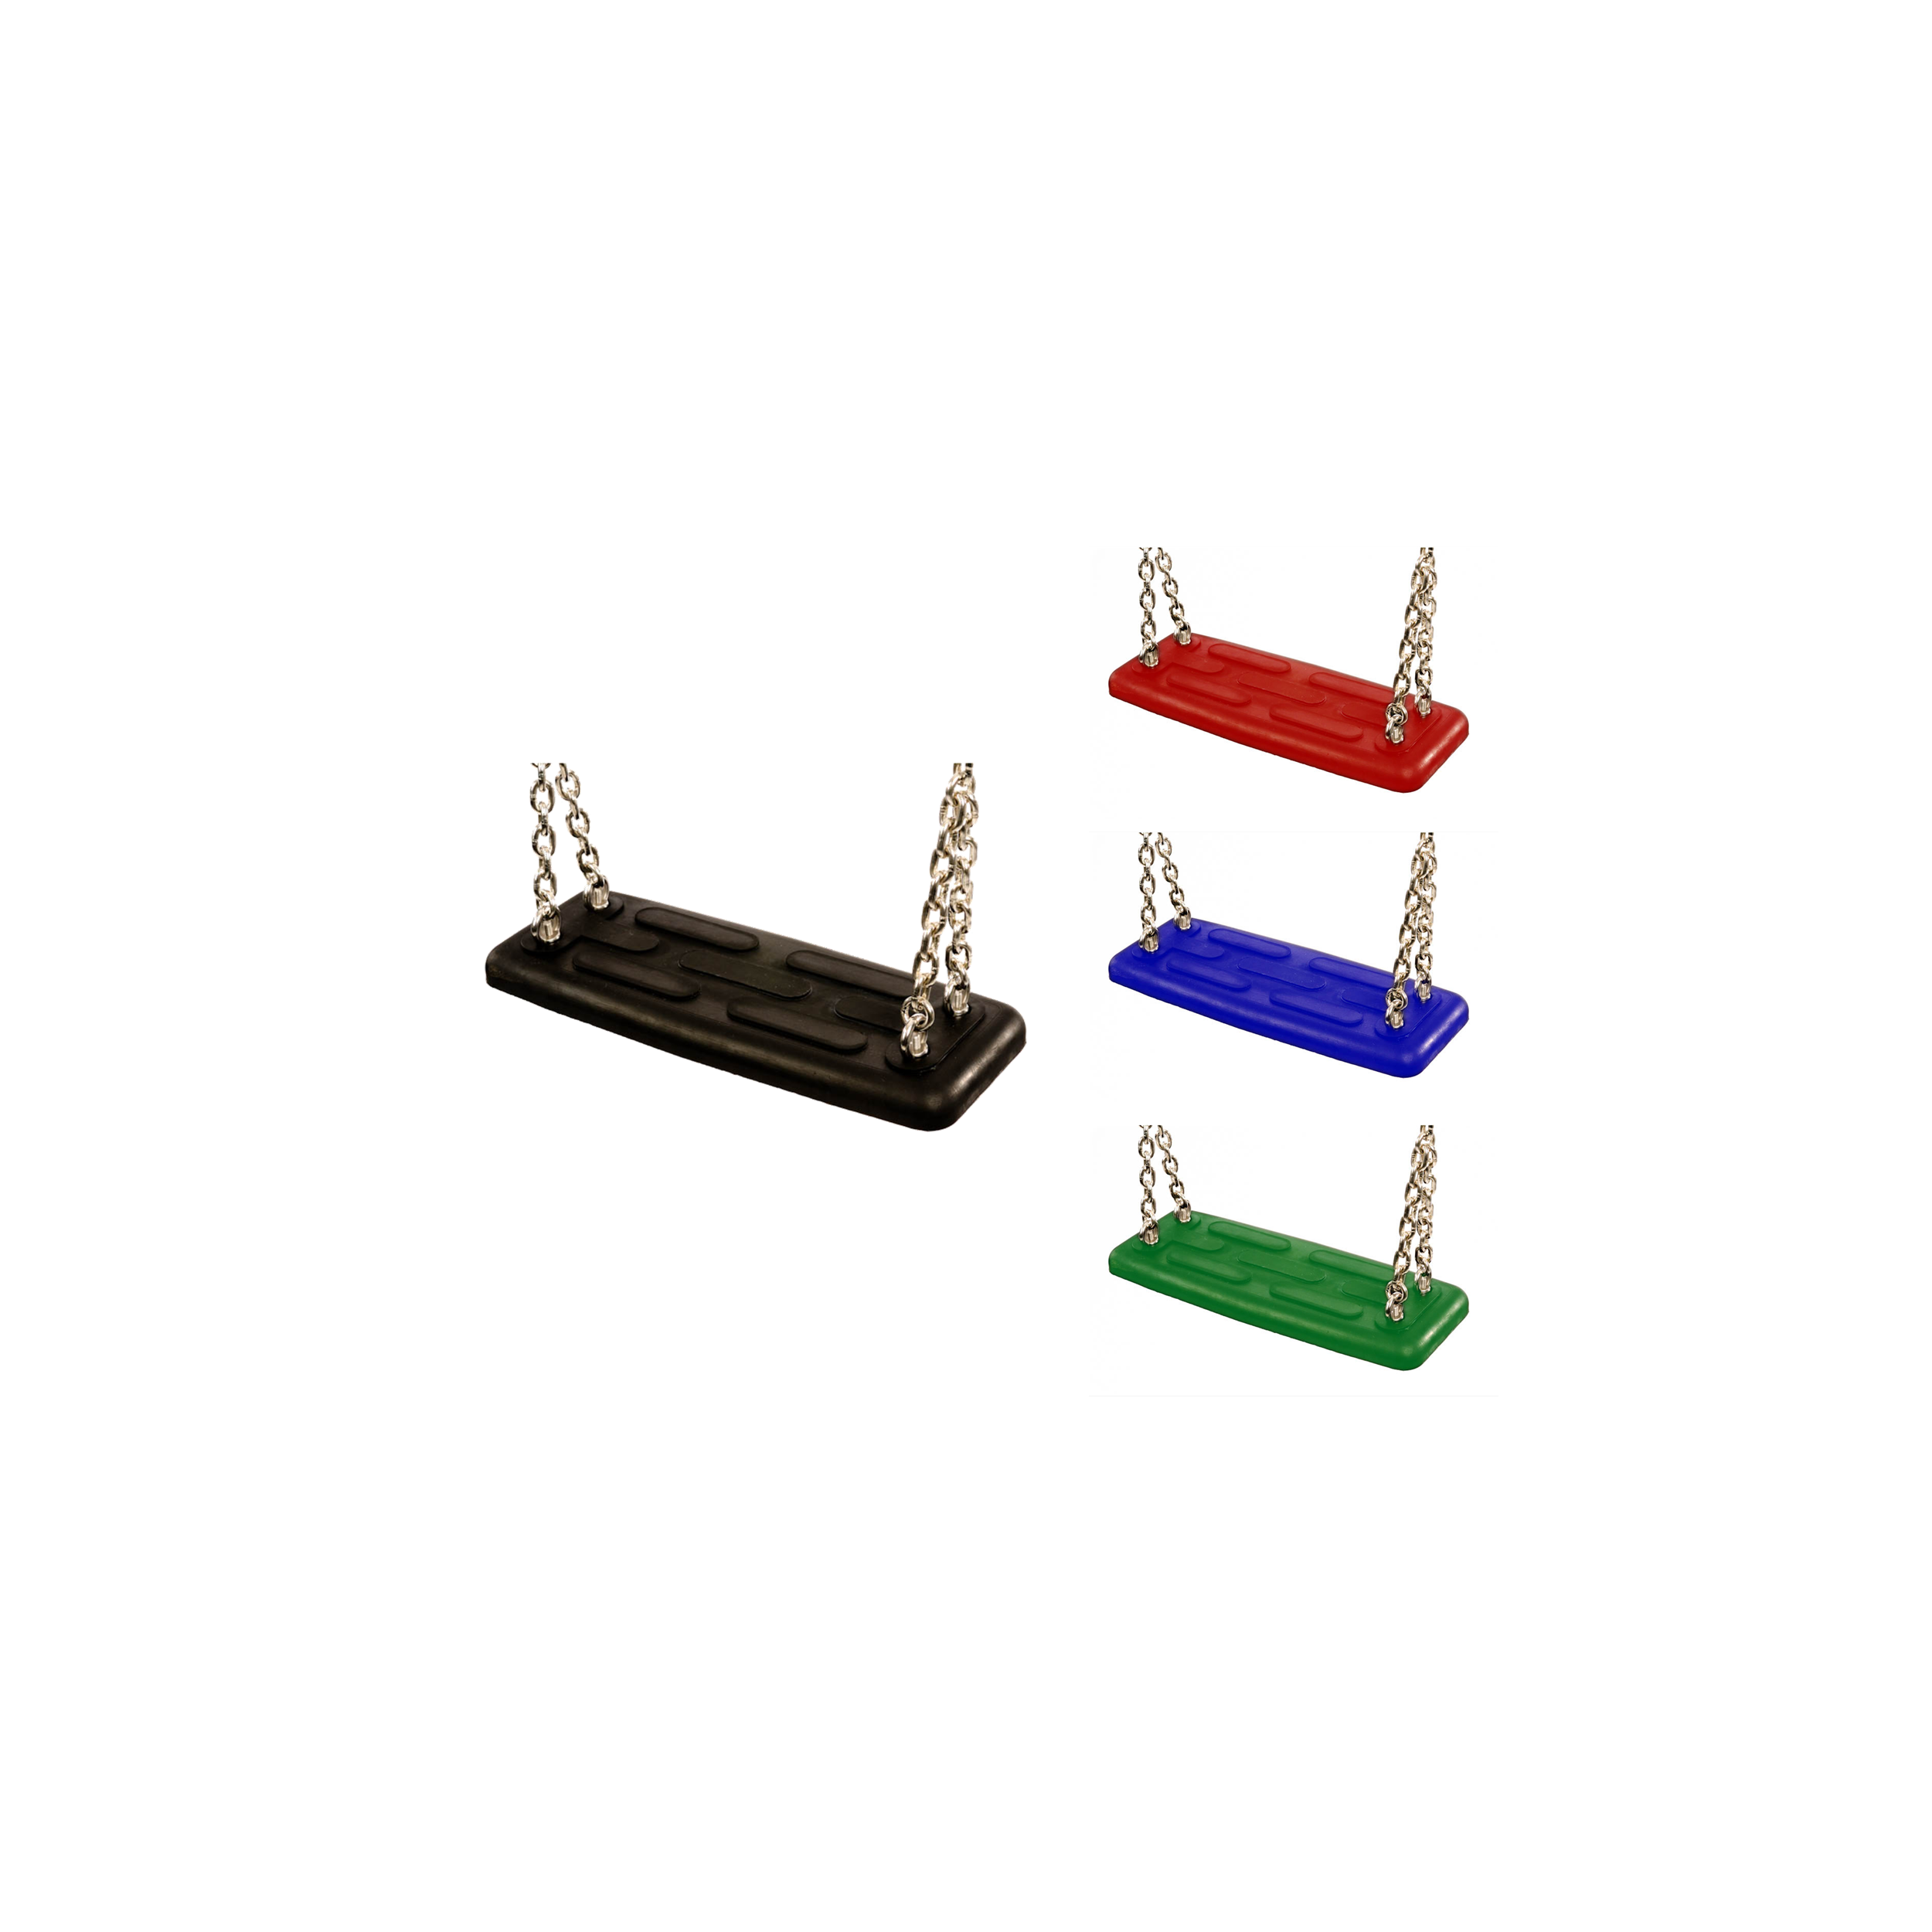 Commercial safety rubber swing seat type 1